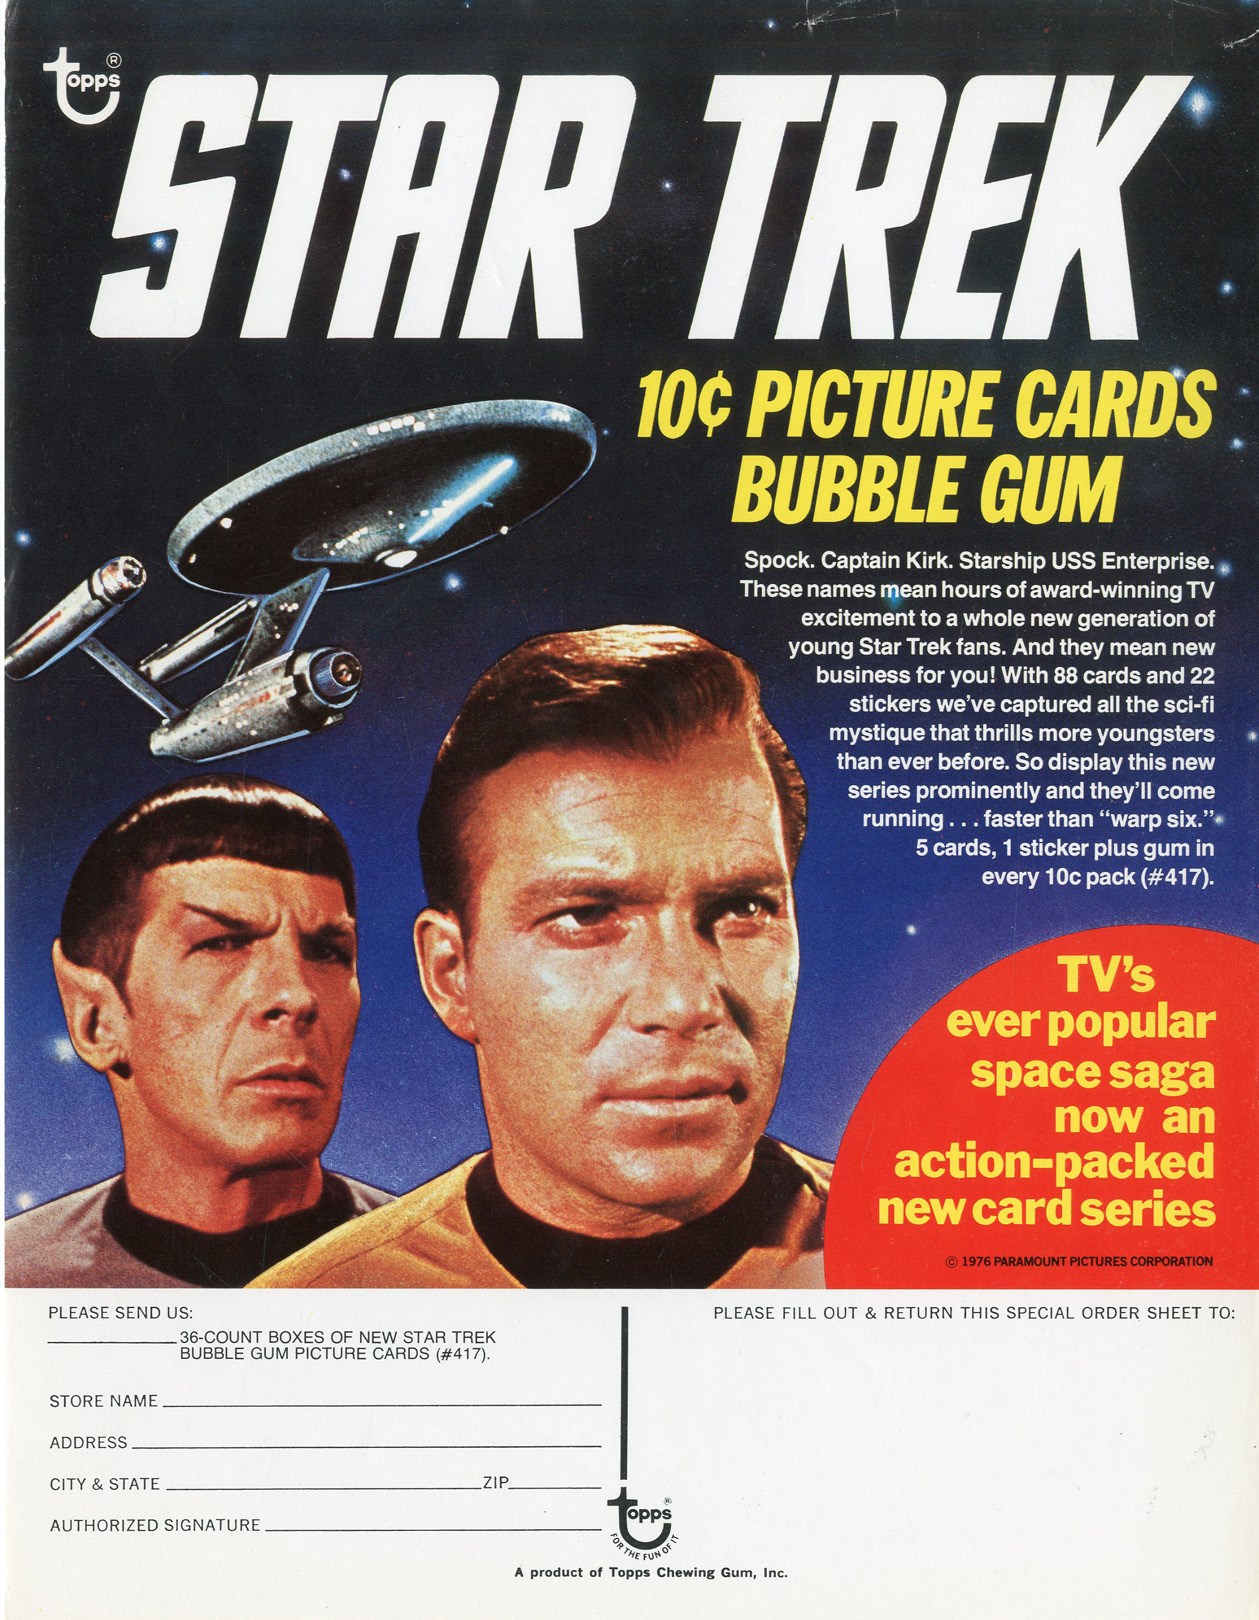 1976 Topps Star Trek Cardboard Ordering Form with Captain Kirk and Spock - Only One Known!